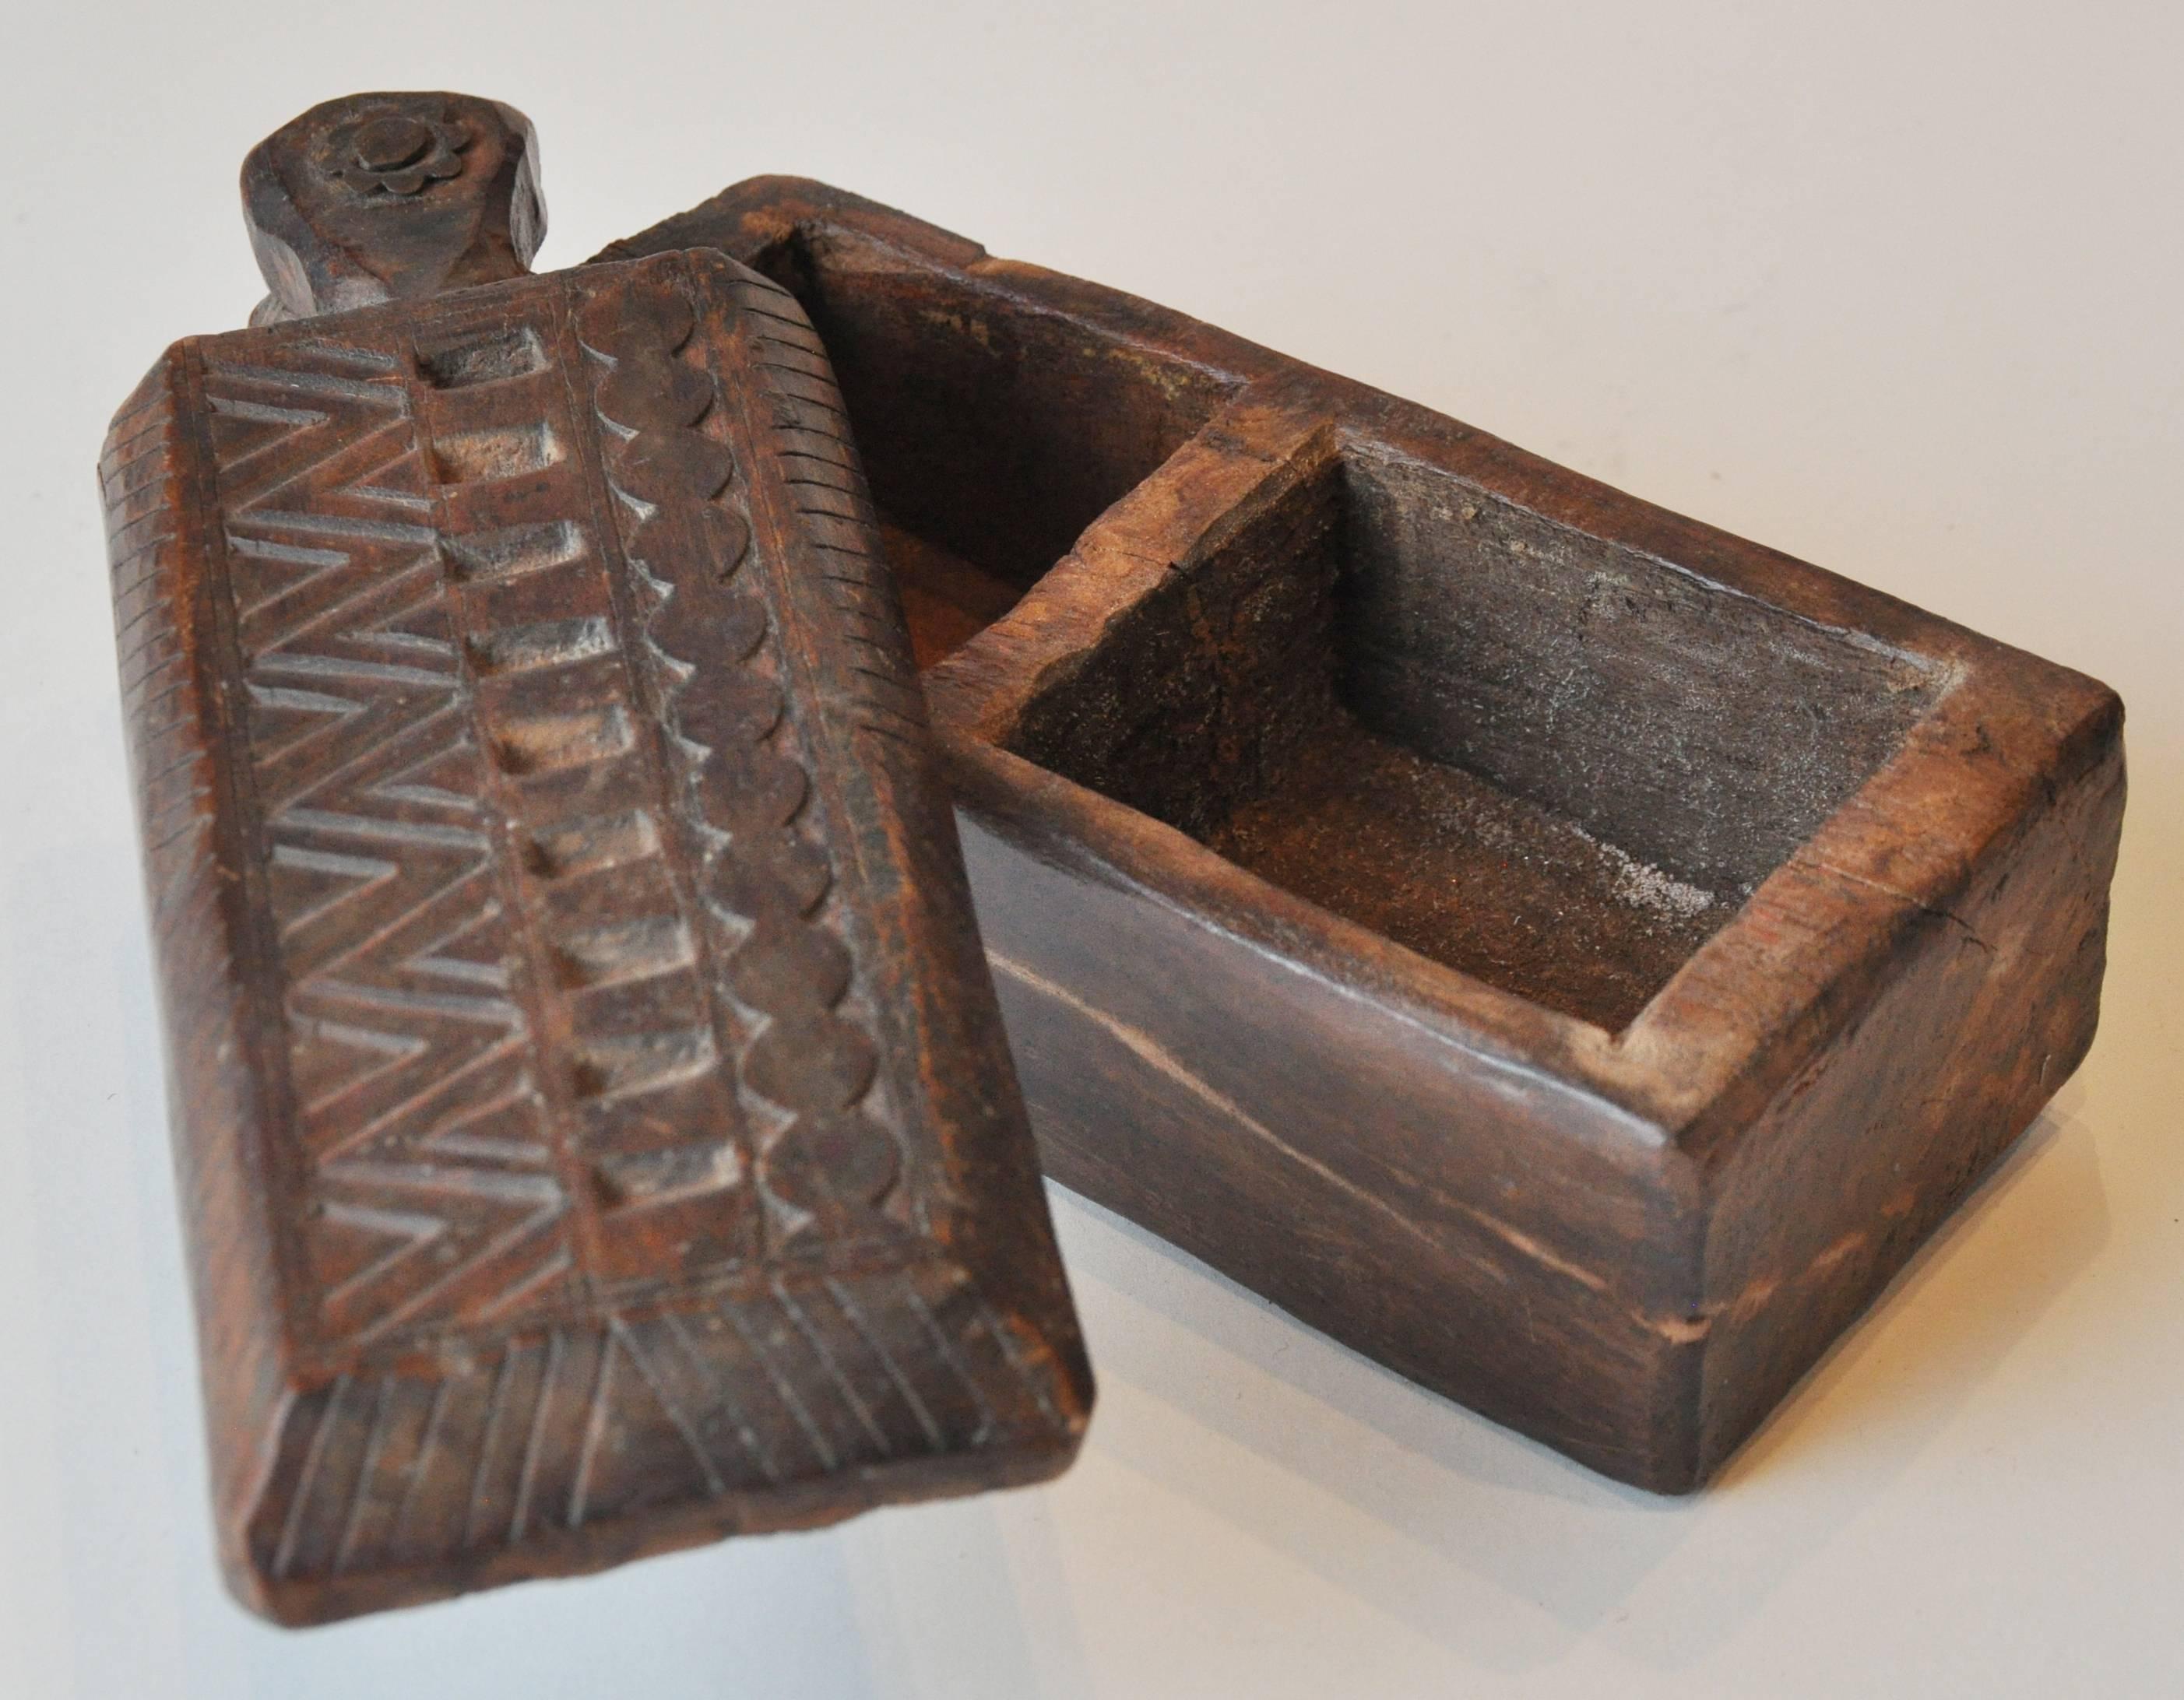 19th century India Rajasthan spice box. Wooden hand-carved with hinged top pivots to open to two compartments. 

